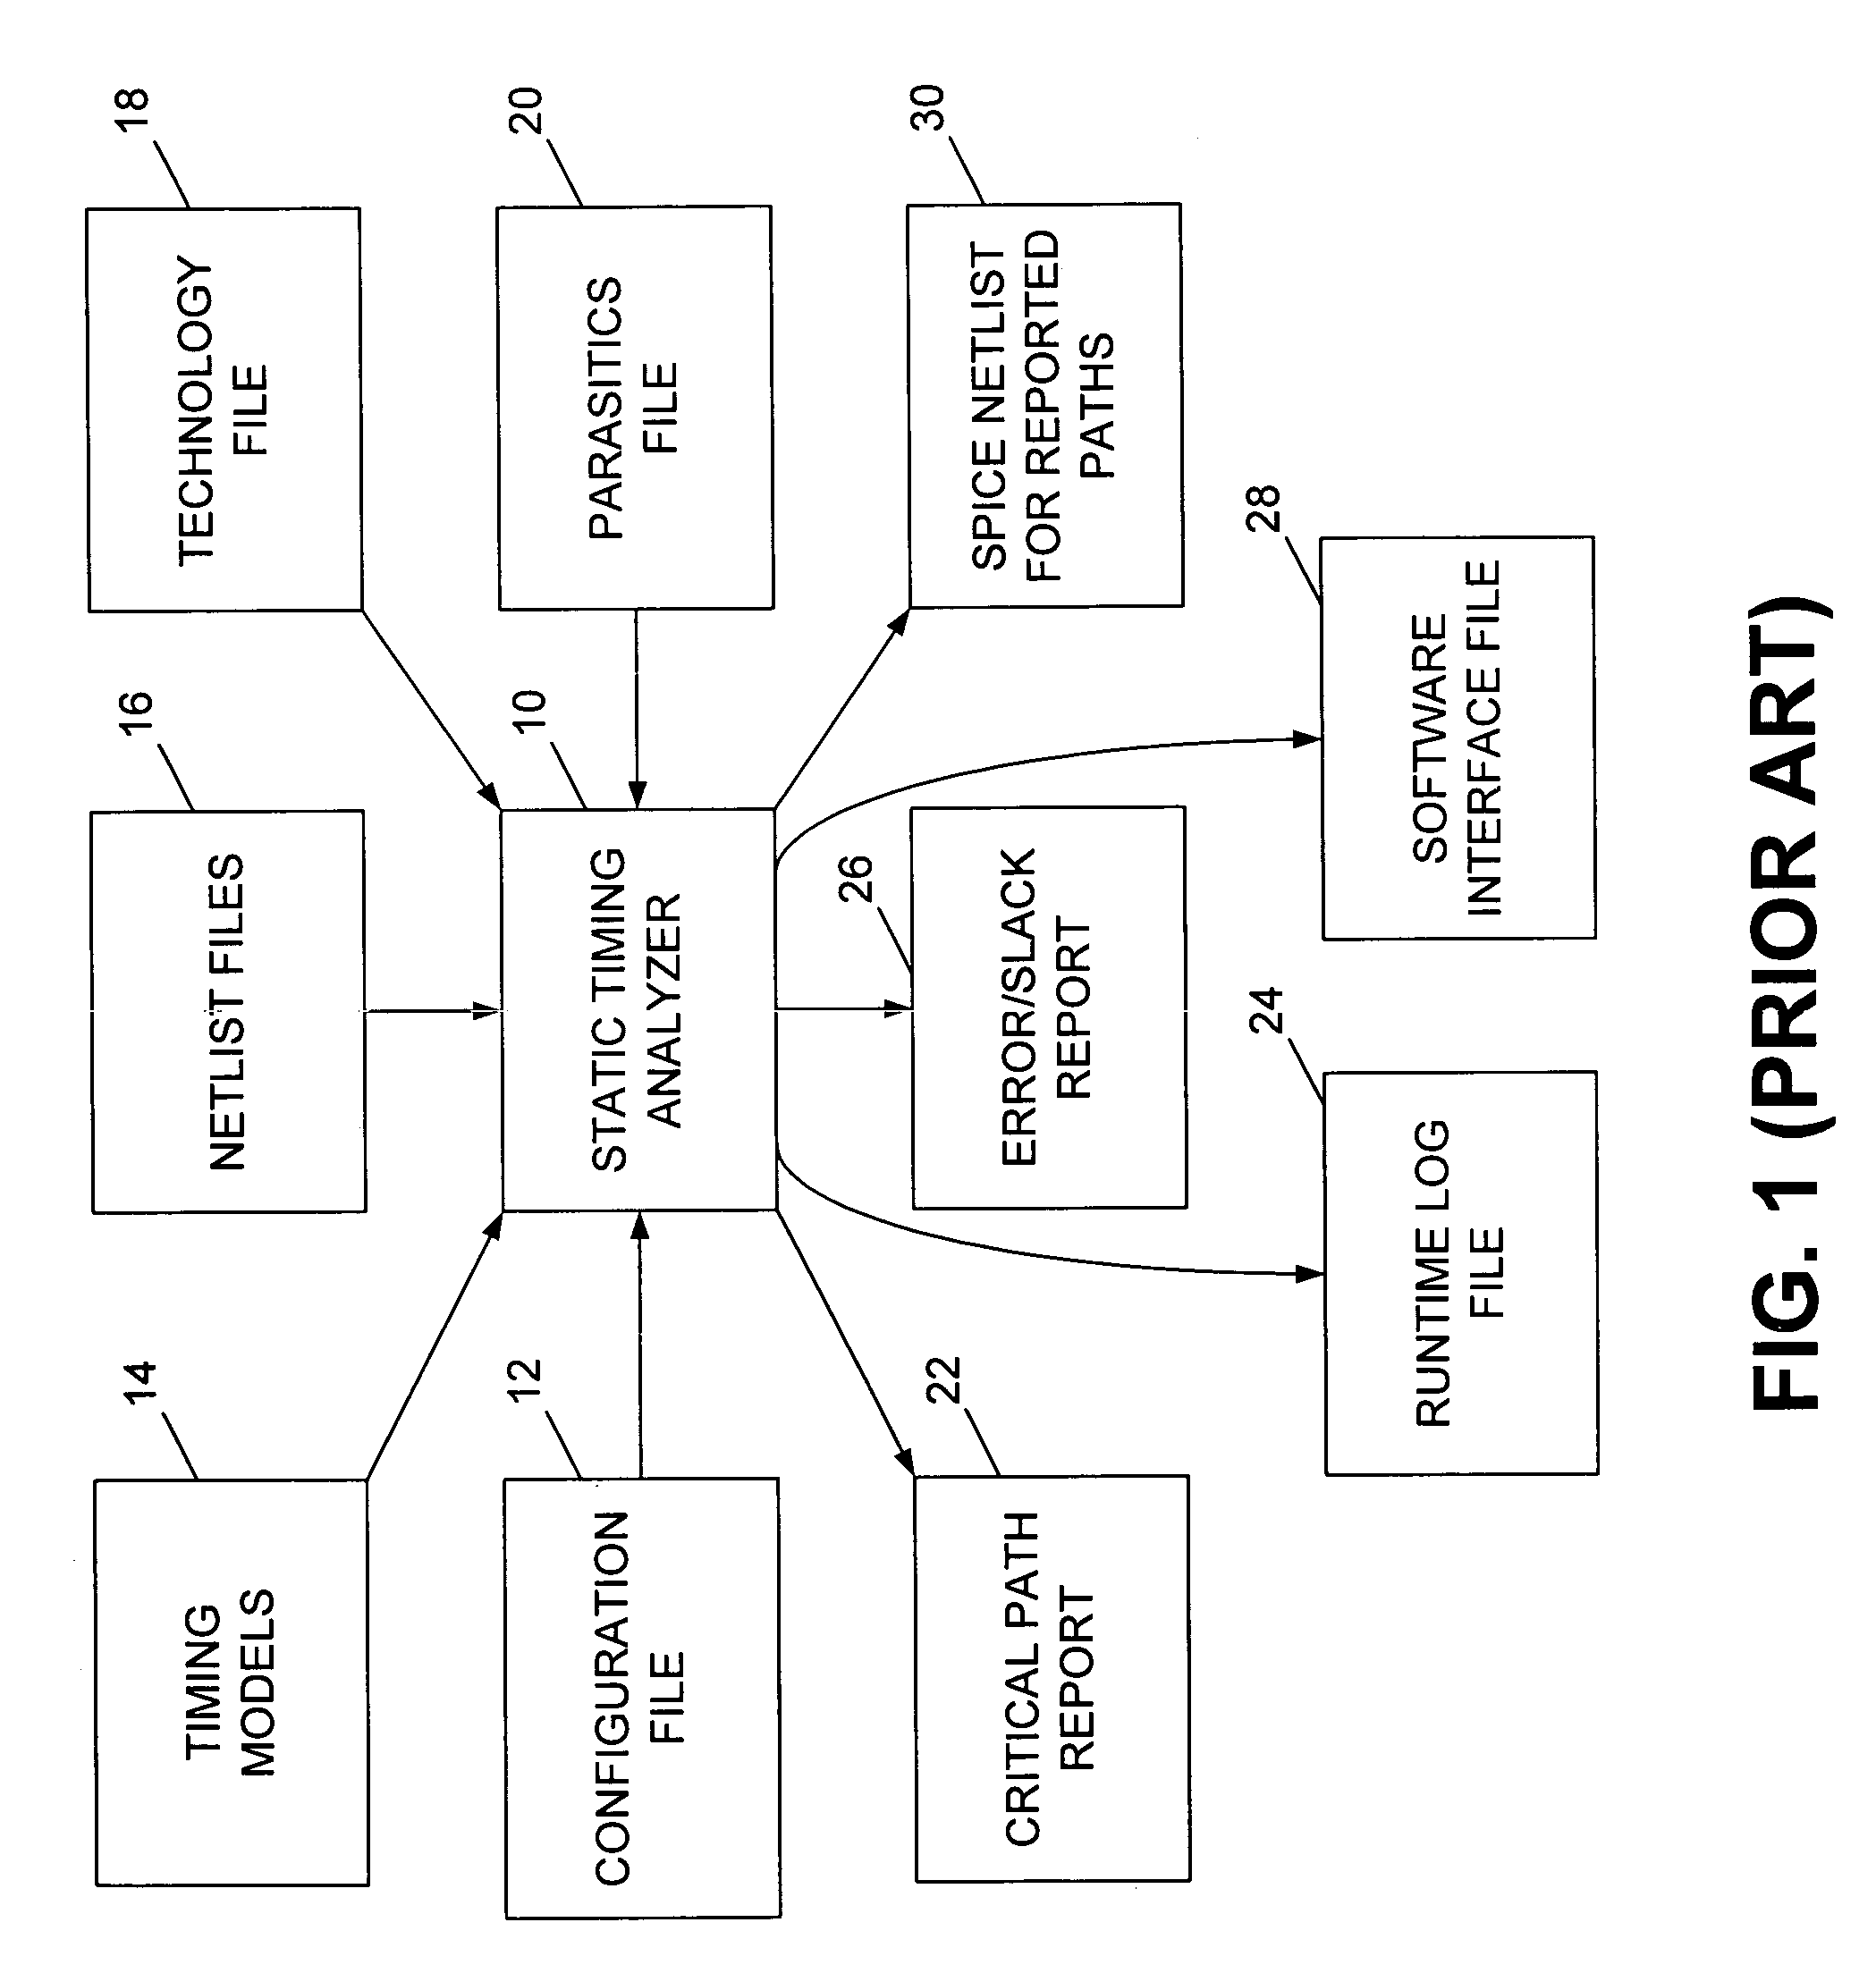 Method and apparatus for determining whether an element in an integrated circuit is a feedback element